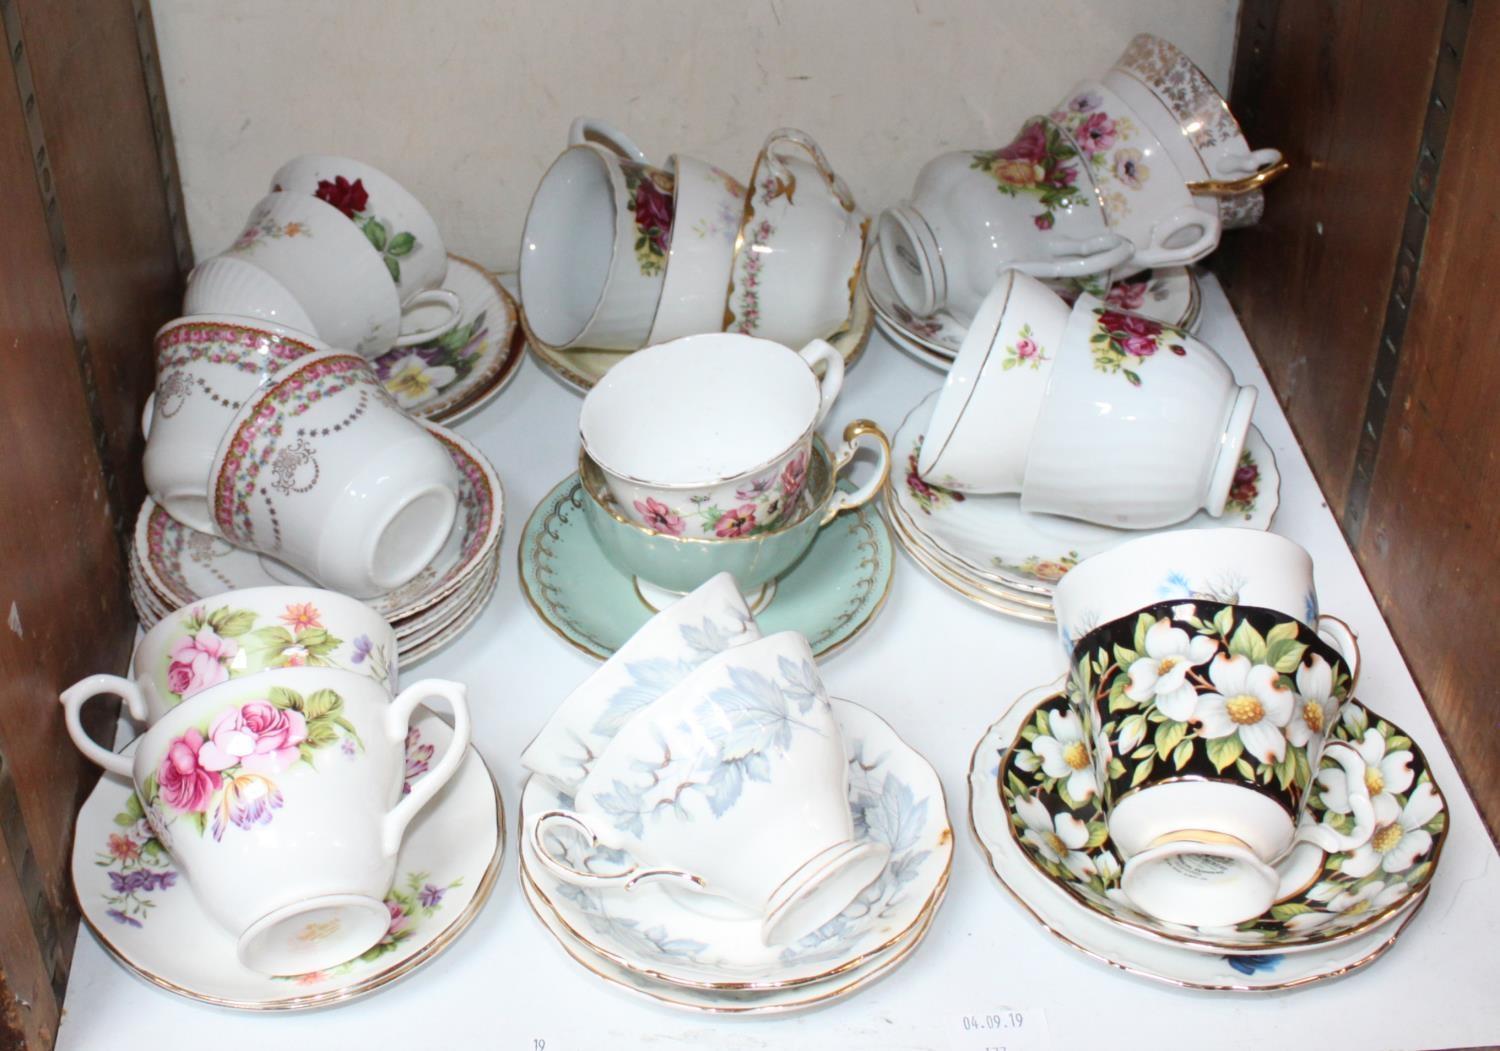 SECTION 28. A quantity of teacups and saucers including Royal Albert etc.